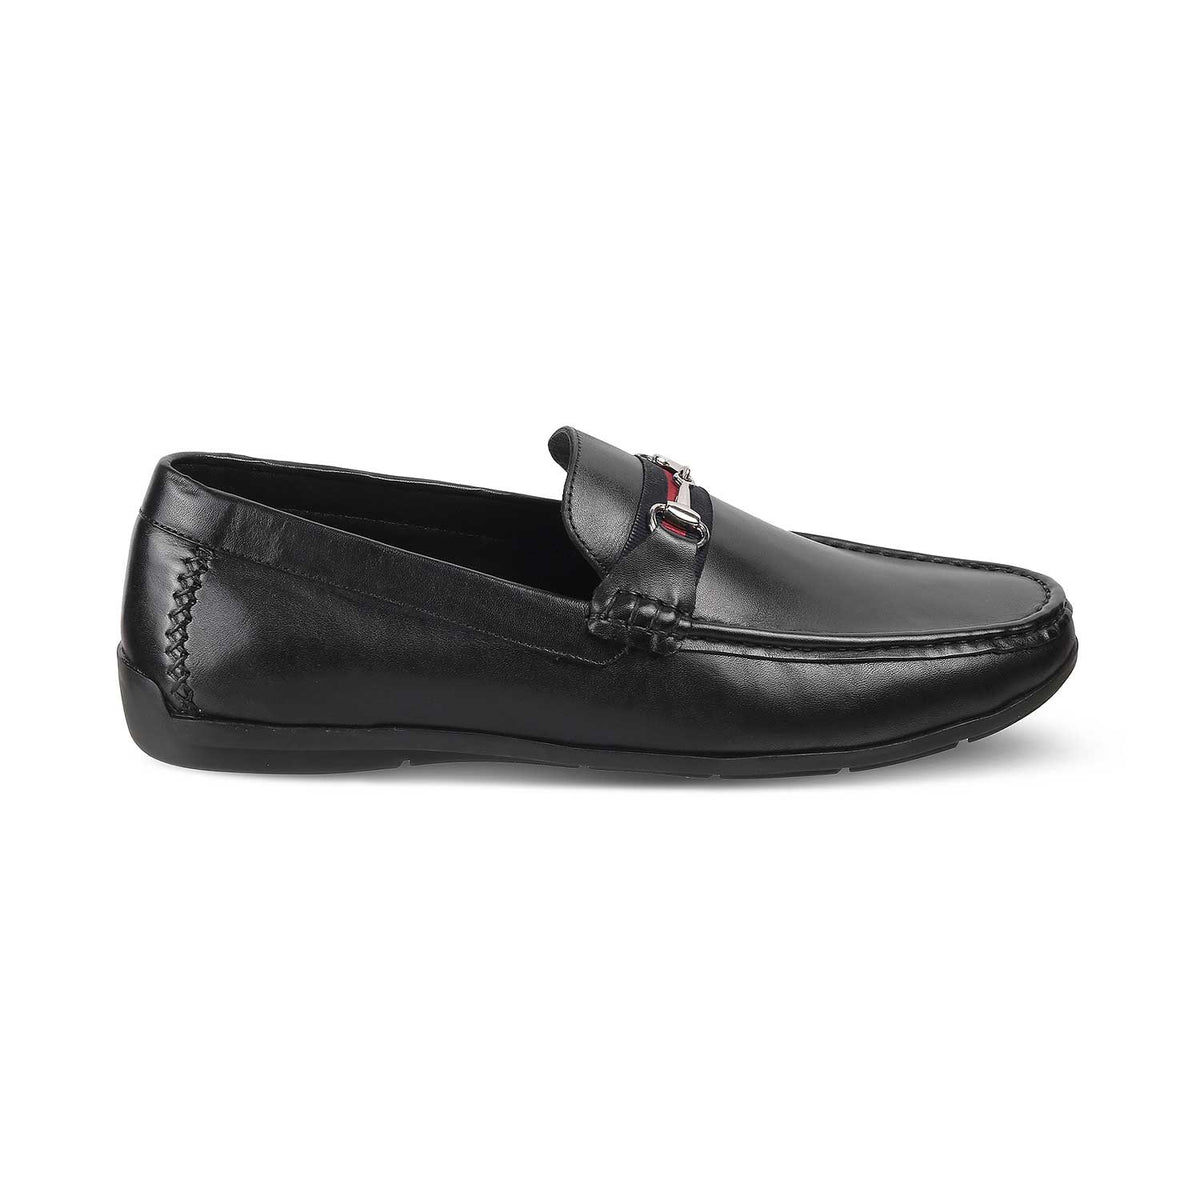 The Crada Black Men's Leather Loafers - Tresmode